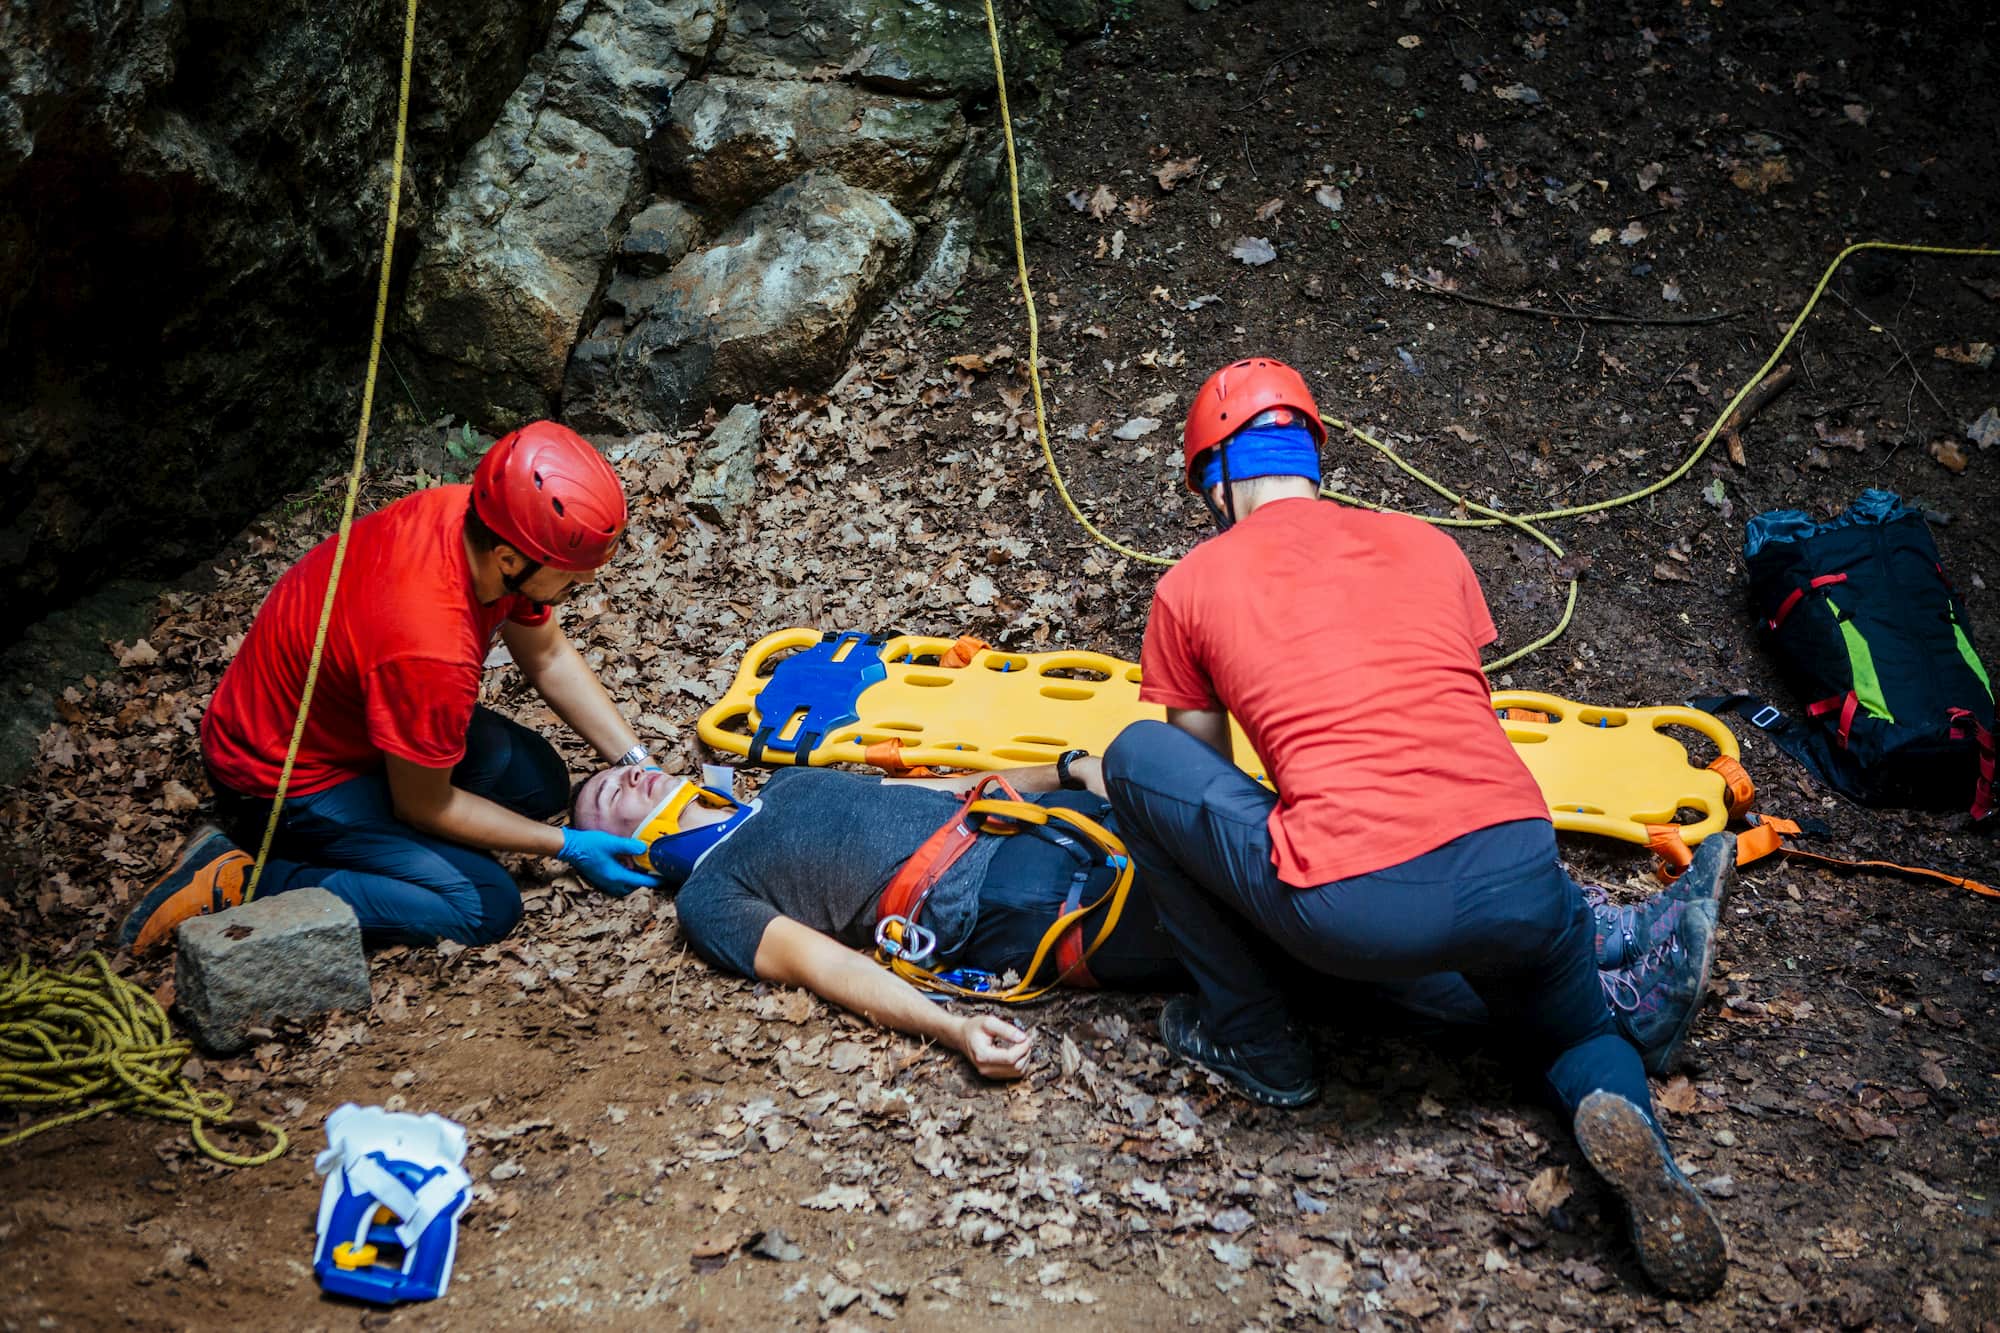 Search and rescue alpinists setting up an immobile person on a stretcher.